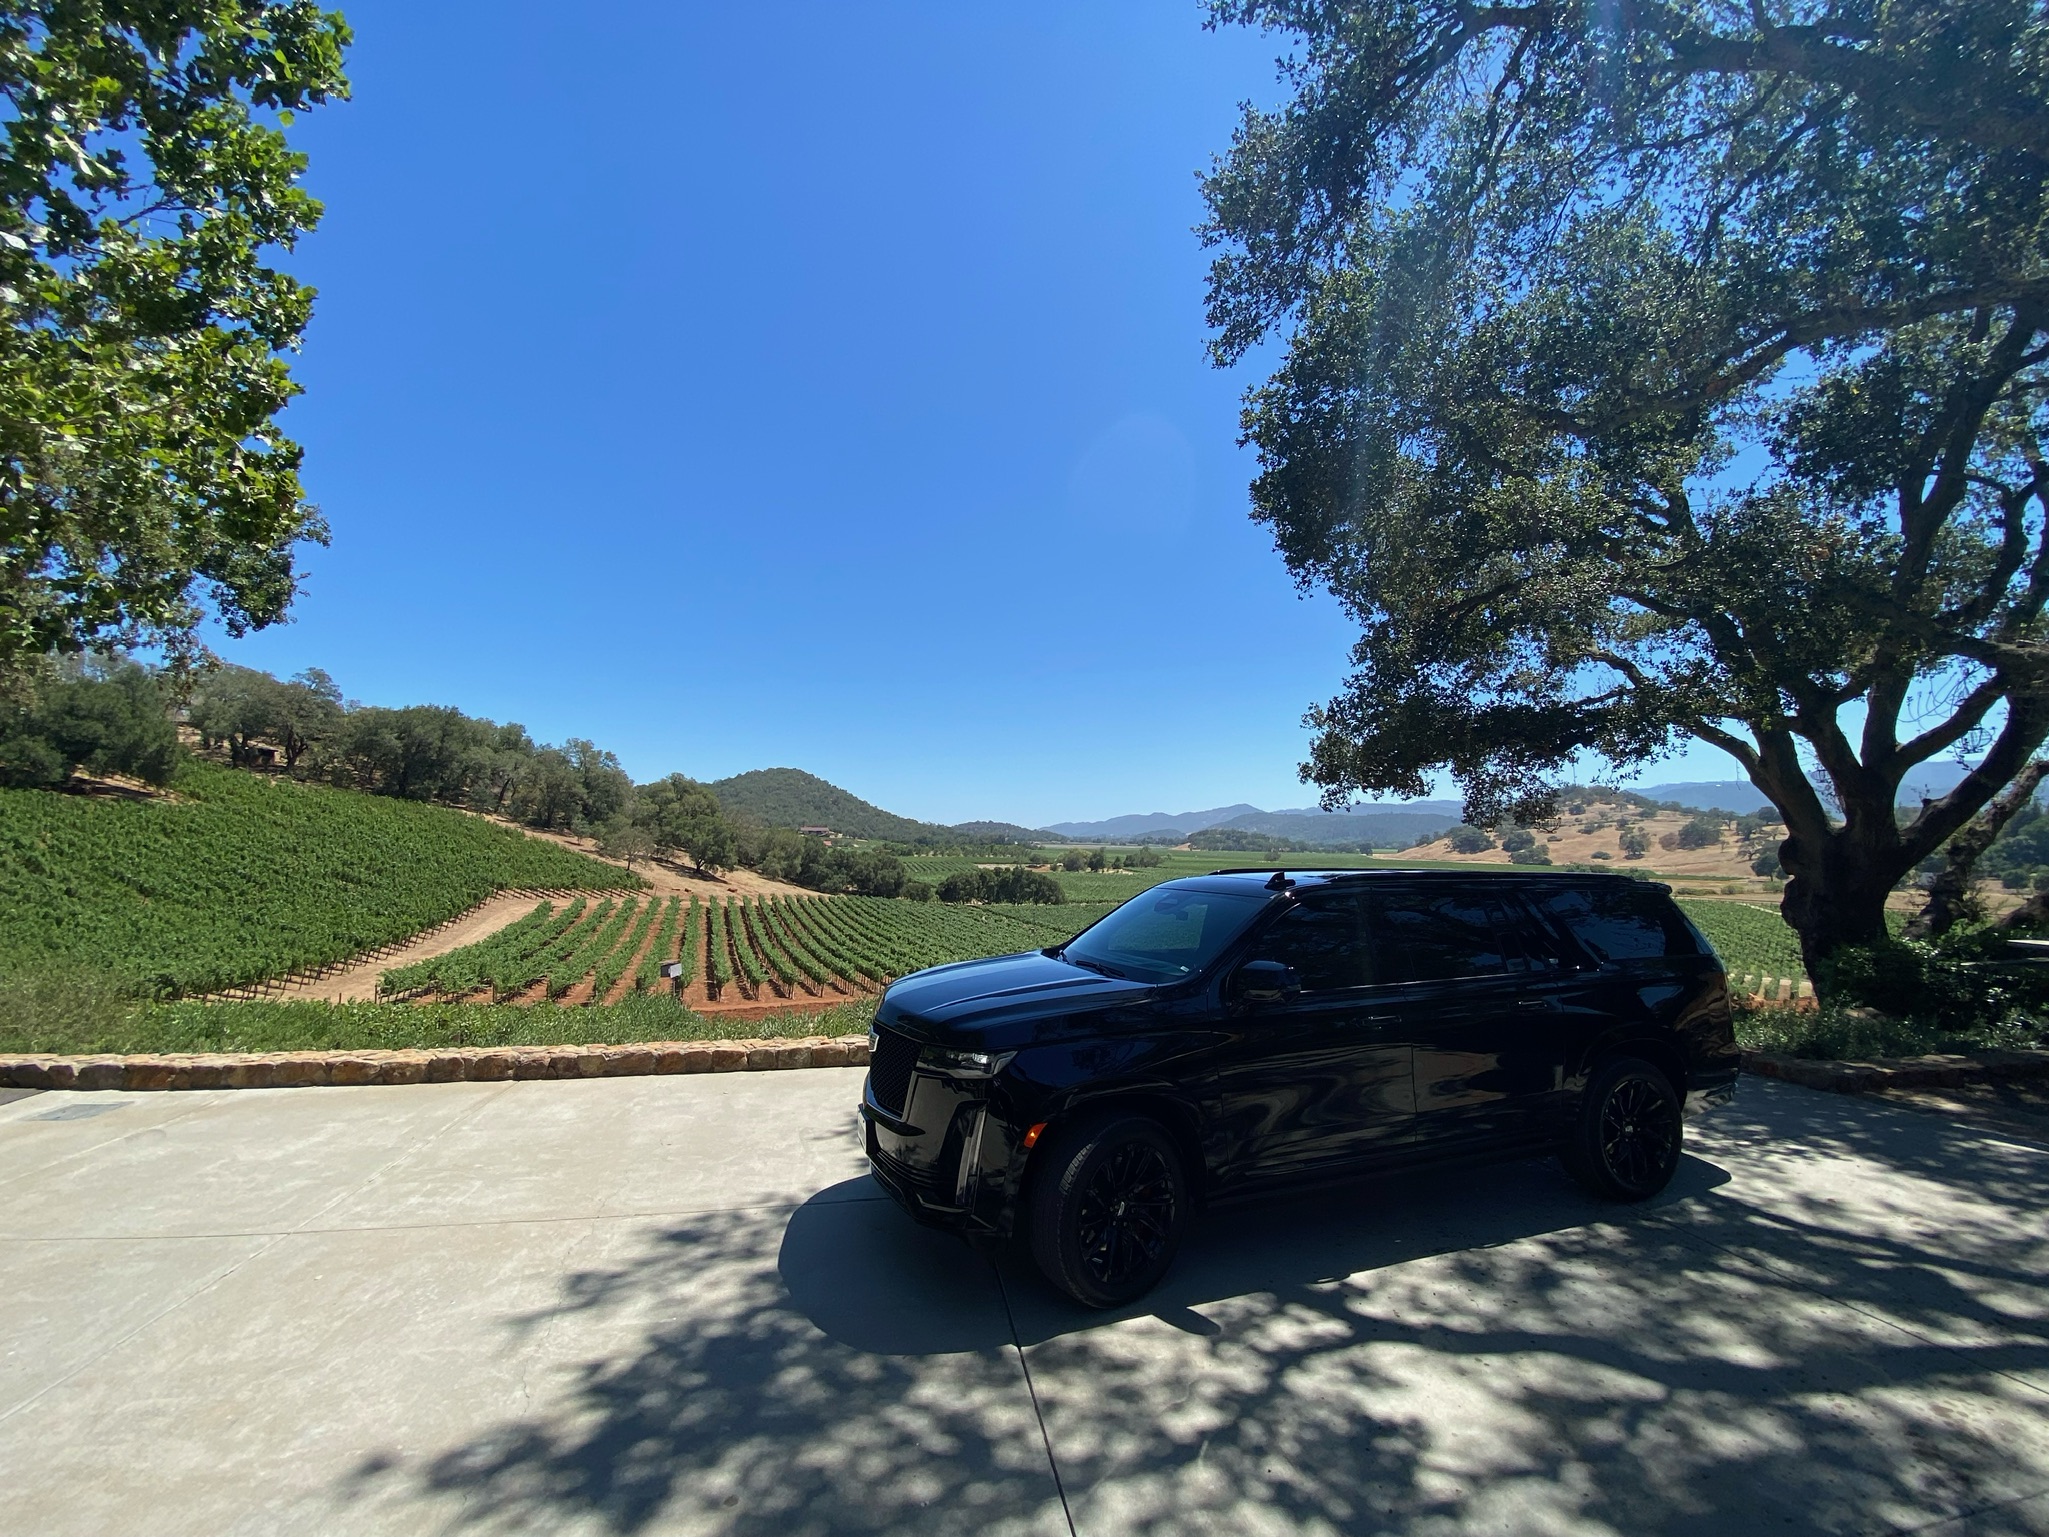 mgllimo in napa valley